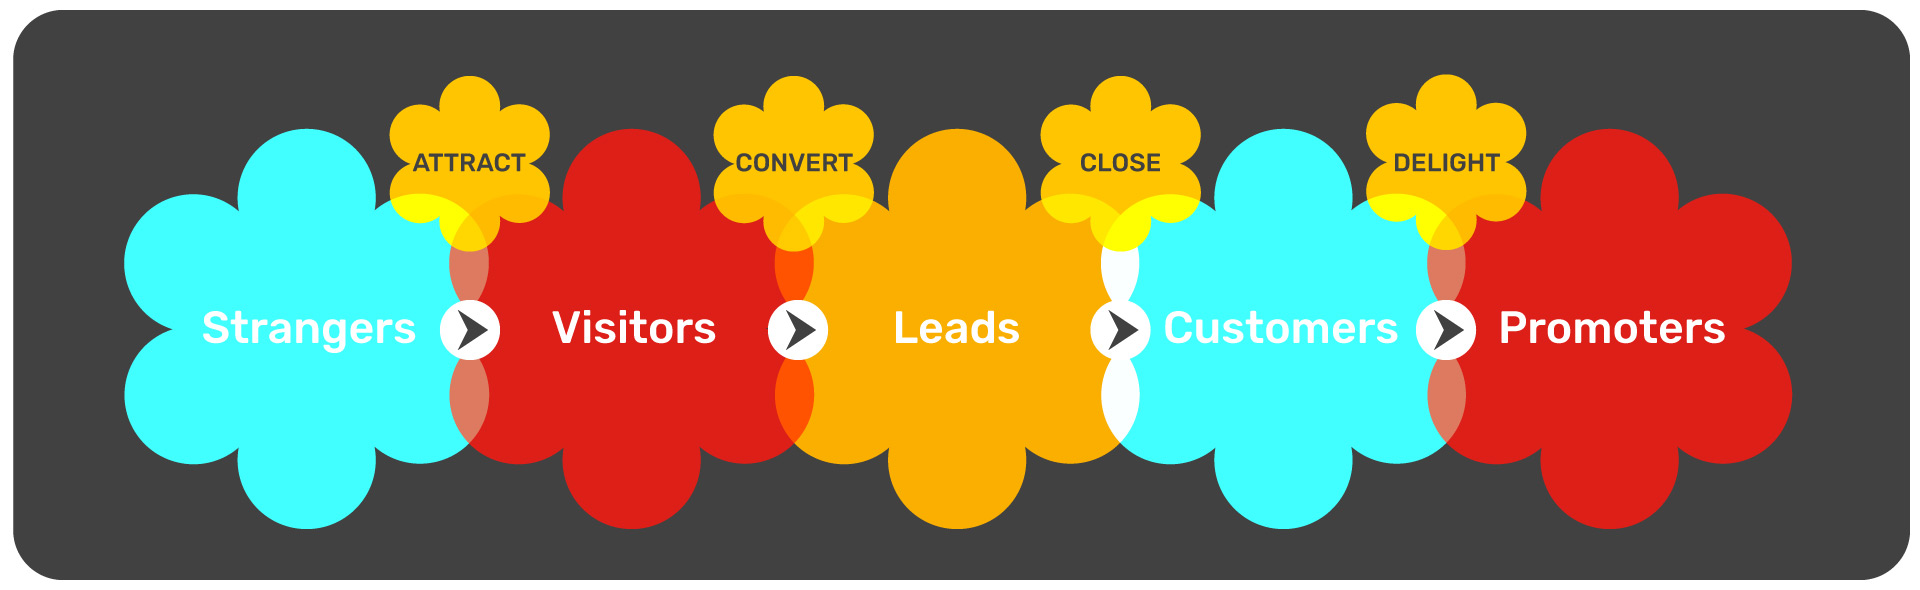 Marketing funnel for customer acquisition